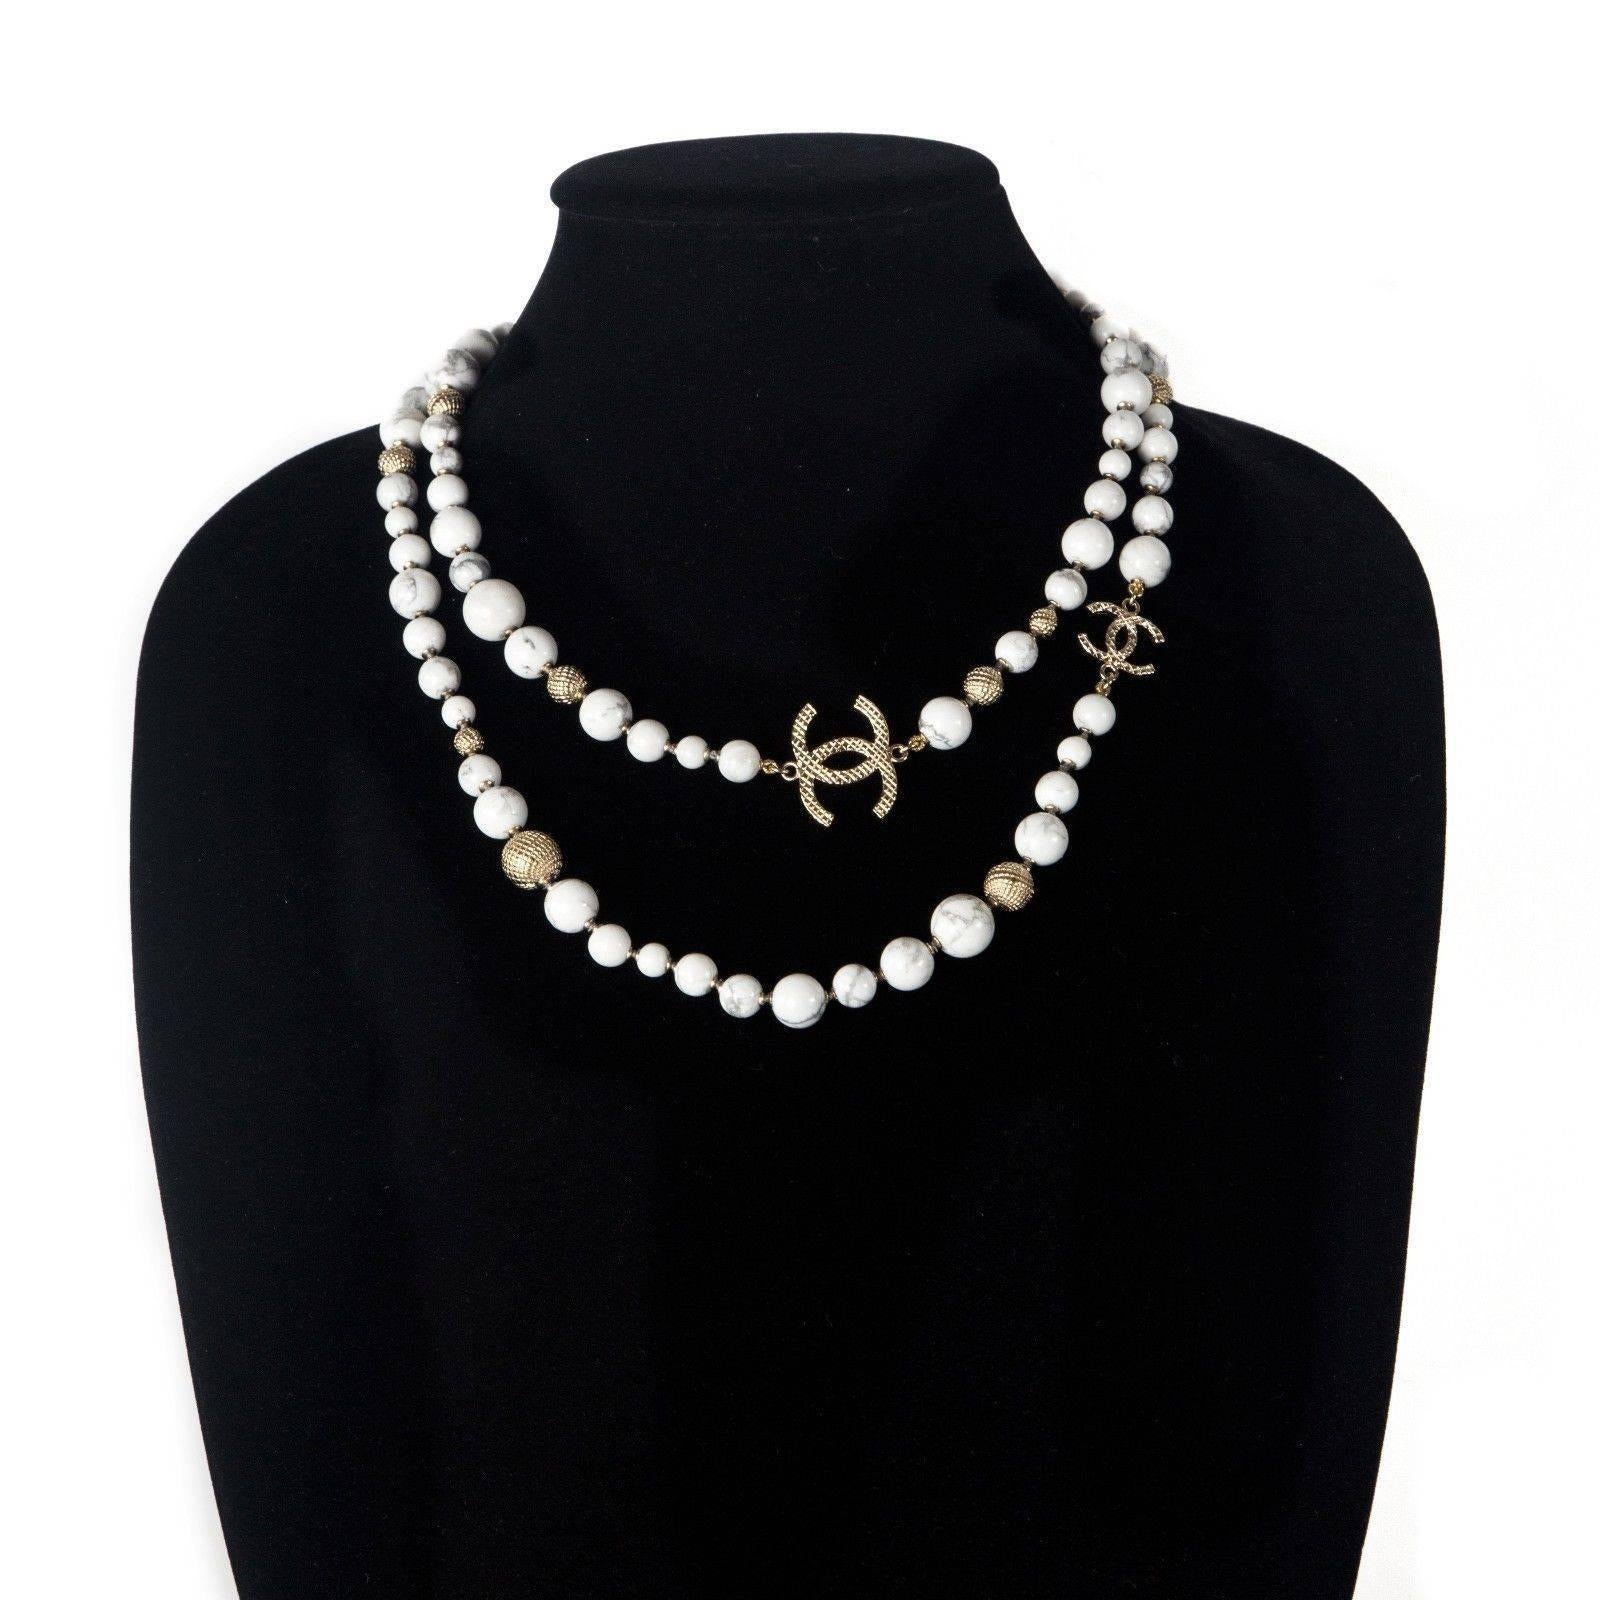 Brand New:

Chanel - 2016 White Marble Pearl Beaded Necklace 

Color: White / Gold
 
Material: Marble / Metal
 
------------------------------------------------------------
 
Details:
 
- gold tone hardware

- CC logo charms throughout

- lobster